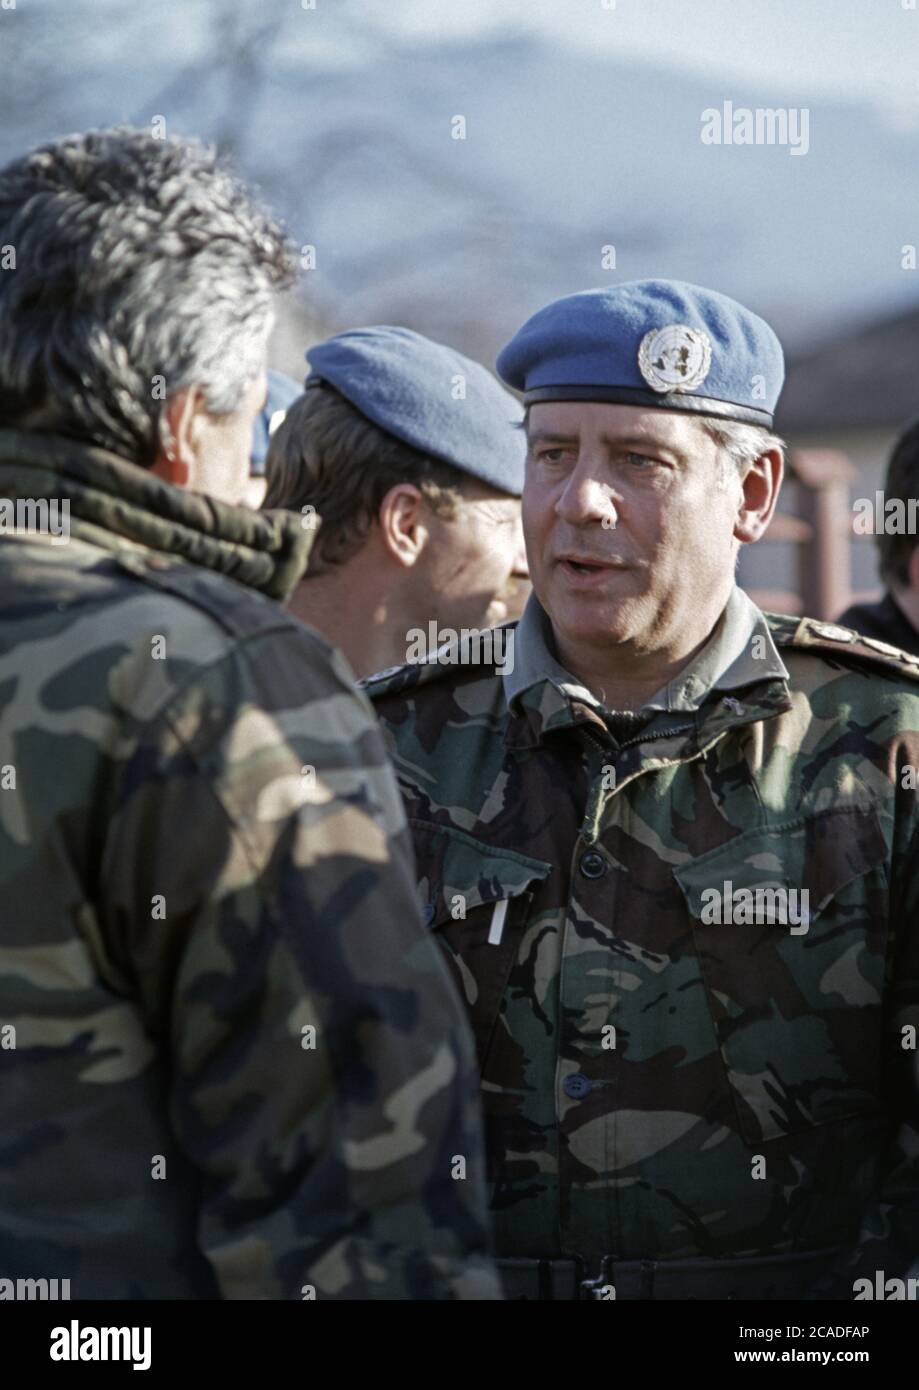 29th March 1994 During the war in Bosnia: General Sir Charles Guthrie, Chief of Staff of the British Army, talks with a Bosnian Muslim soldier during a tour of Stari Vitez in central Bosnia. Stock Photo